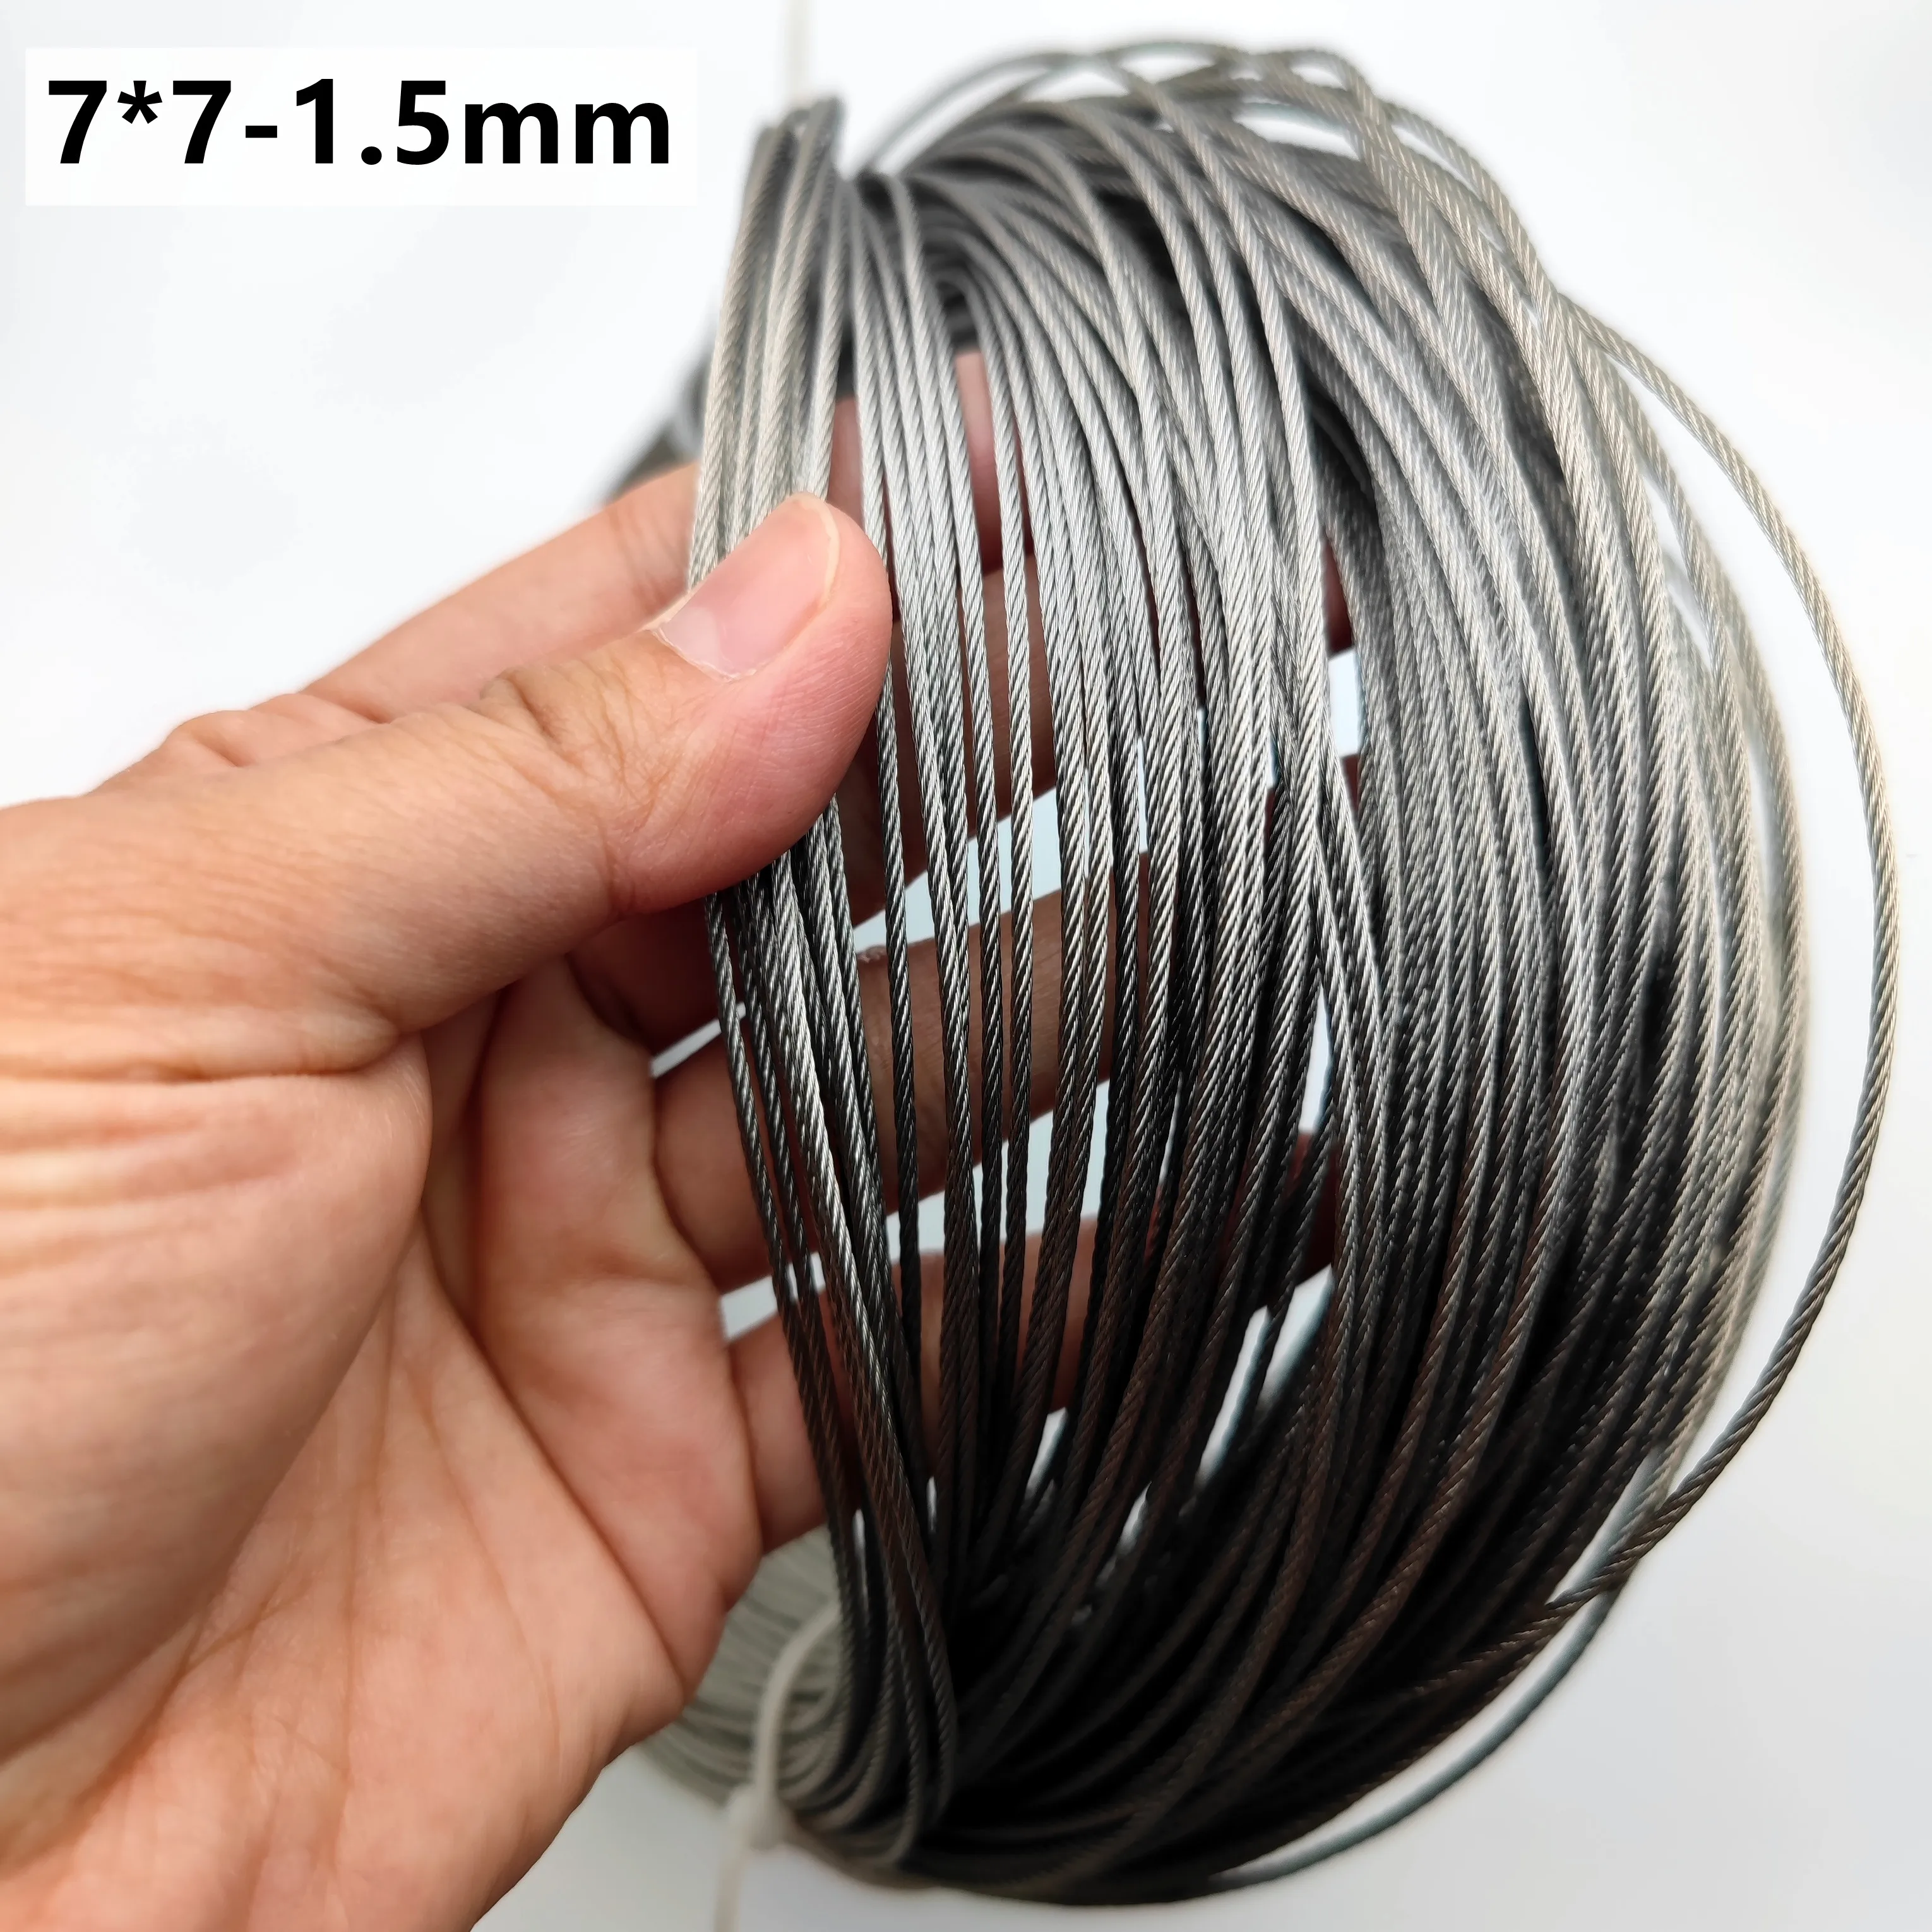 50M/100M/200M 1.5mm Diameter 7X7 Construction 304 Stainless steel Wire rope Alambre Softer Fishing Lifting Cable pvc coating 50m 2mm 3mm 7x7 construction 304 stainless steel wire rope softer fishing lifting cable